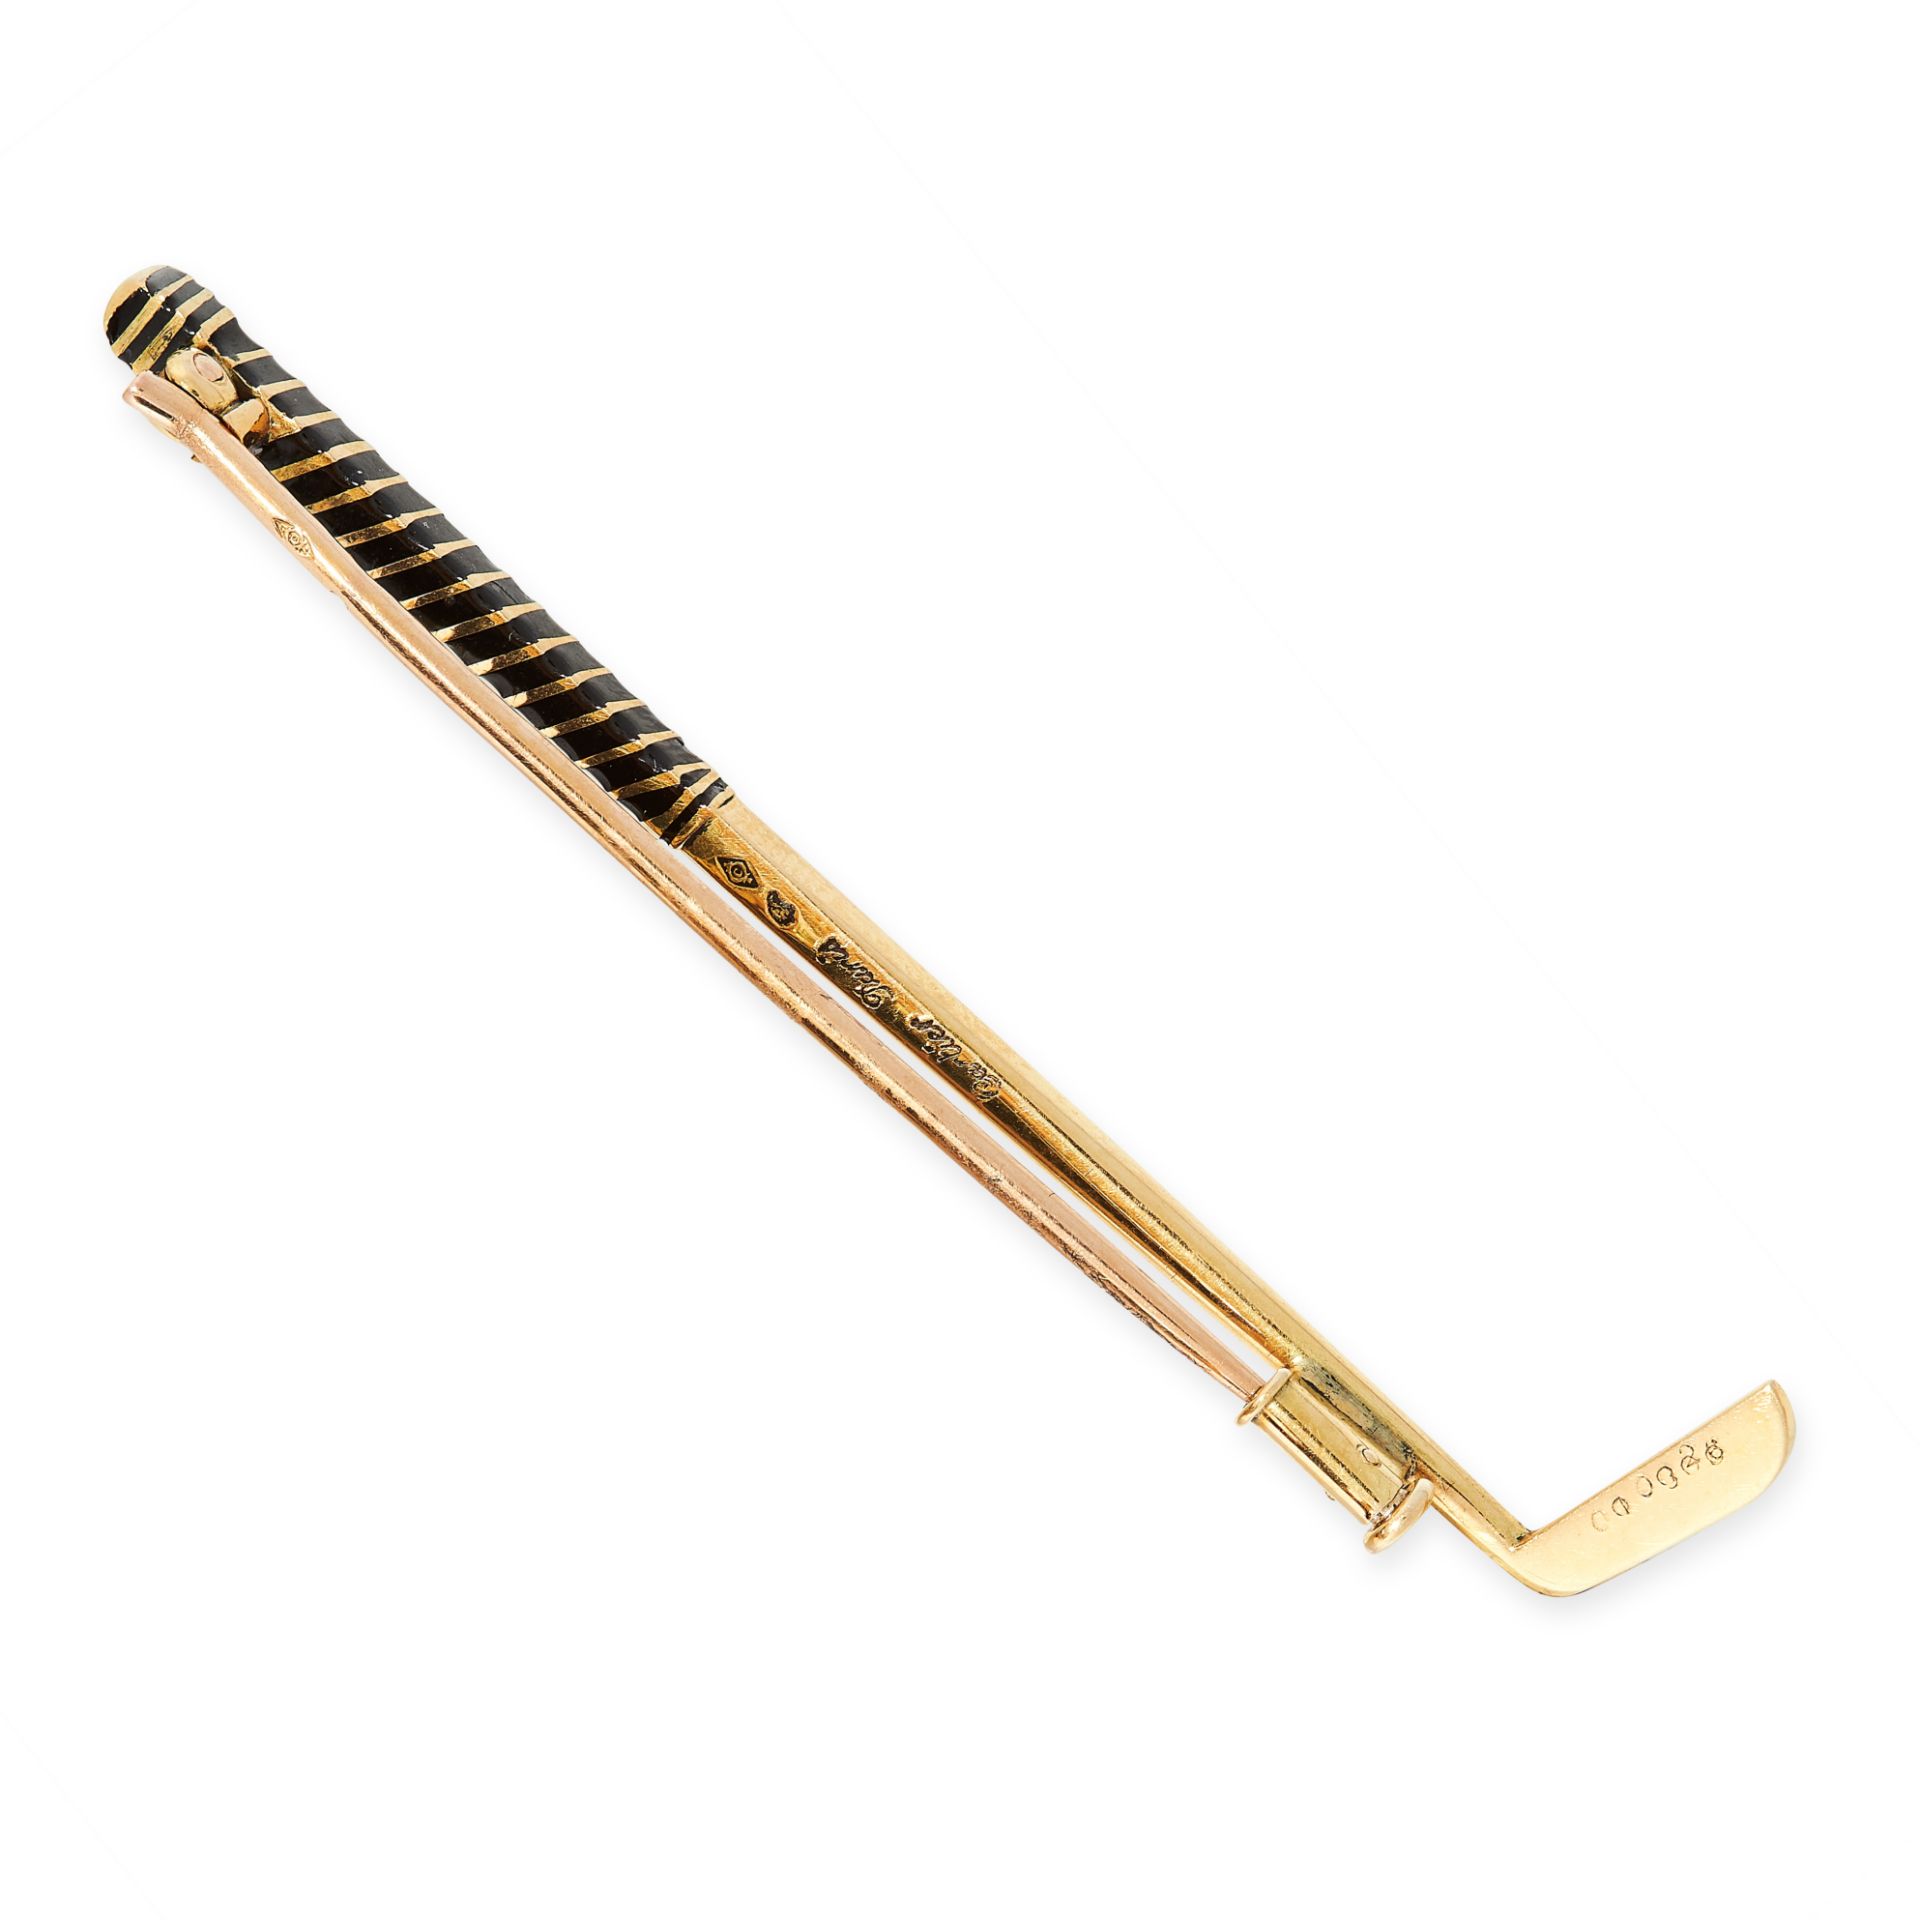 A VINTAGE ENAMEL GOLF CLUB BROOCH, CARTIER PARIS in 18ct yellow gold, designed as a golf club, the - Image 2 of 2